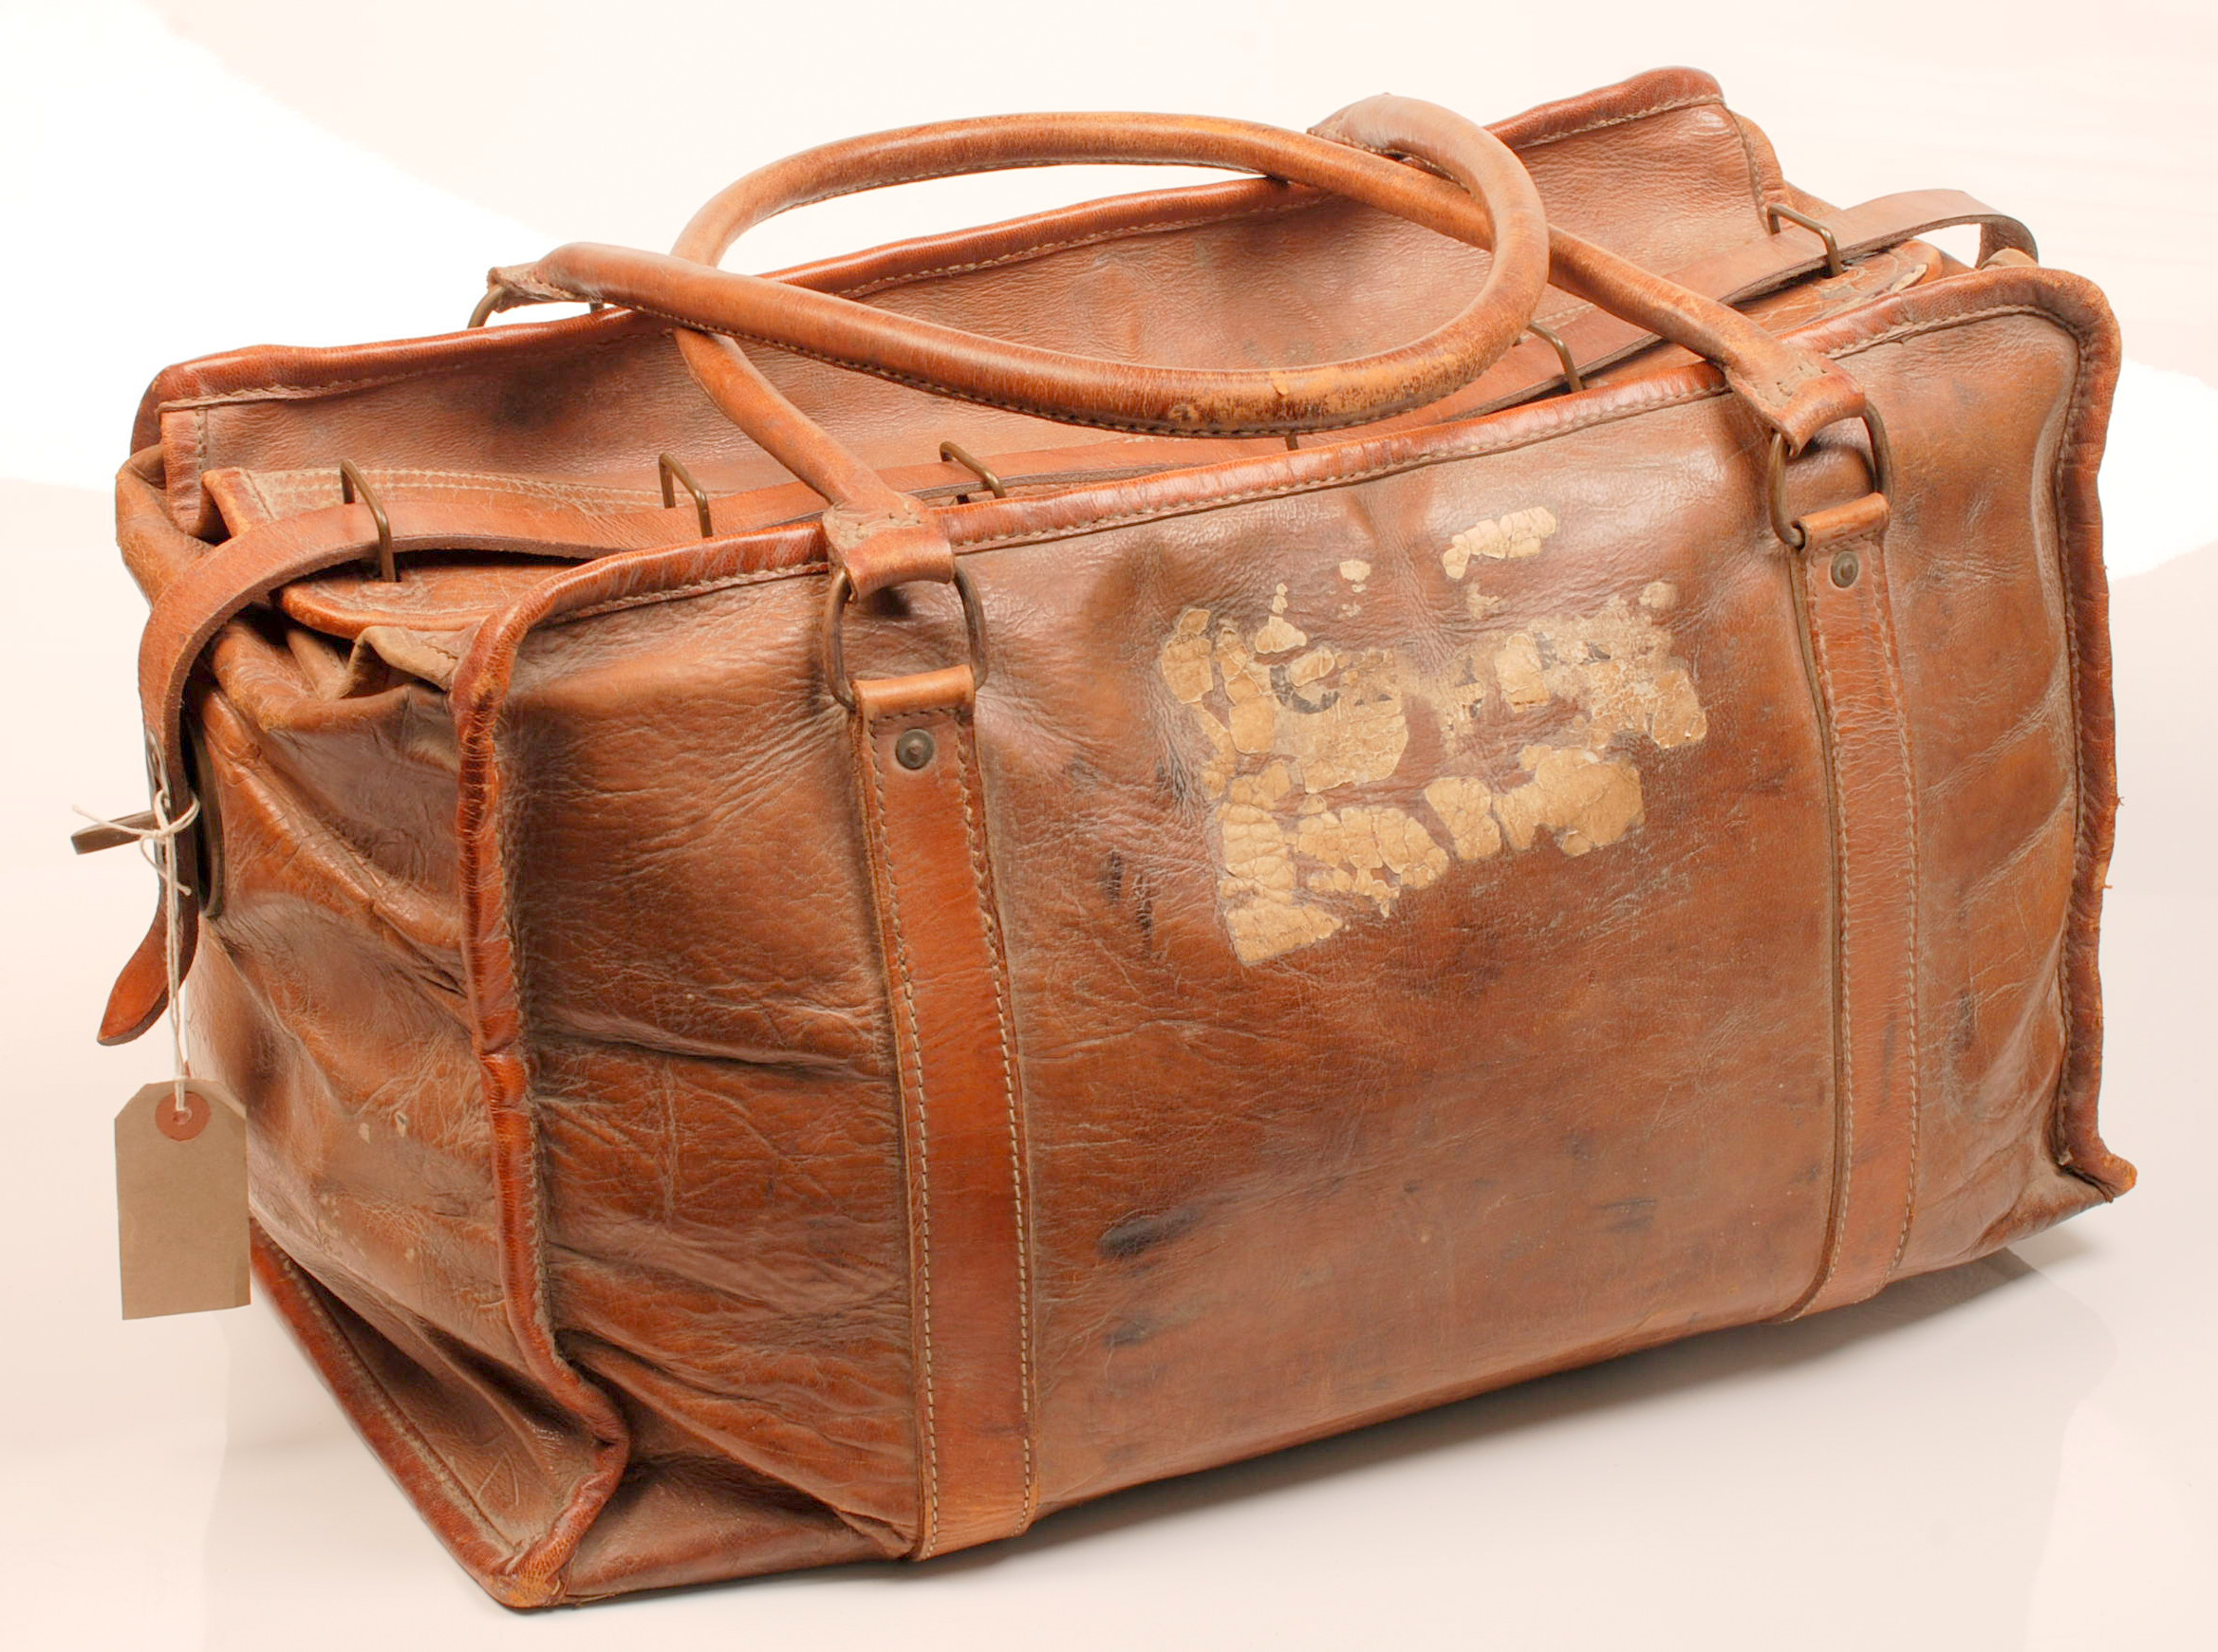 A leather holdall.